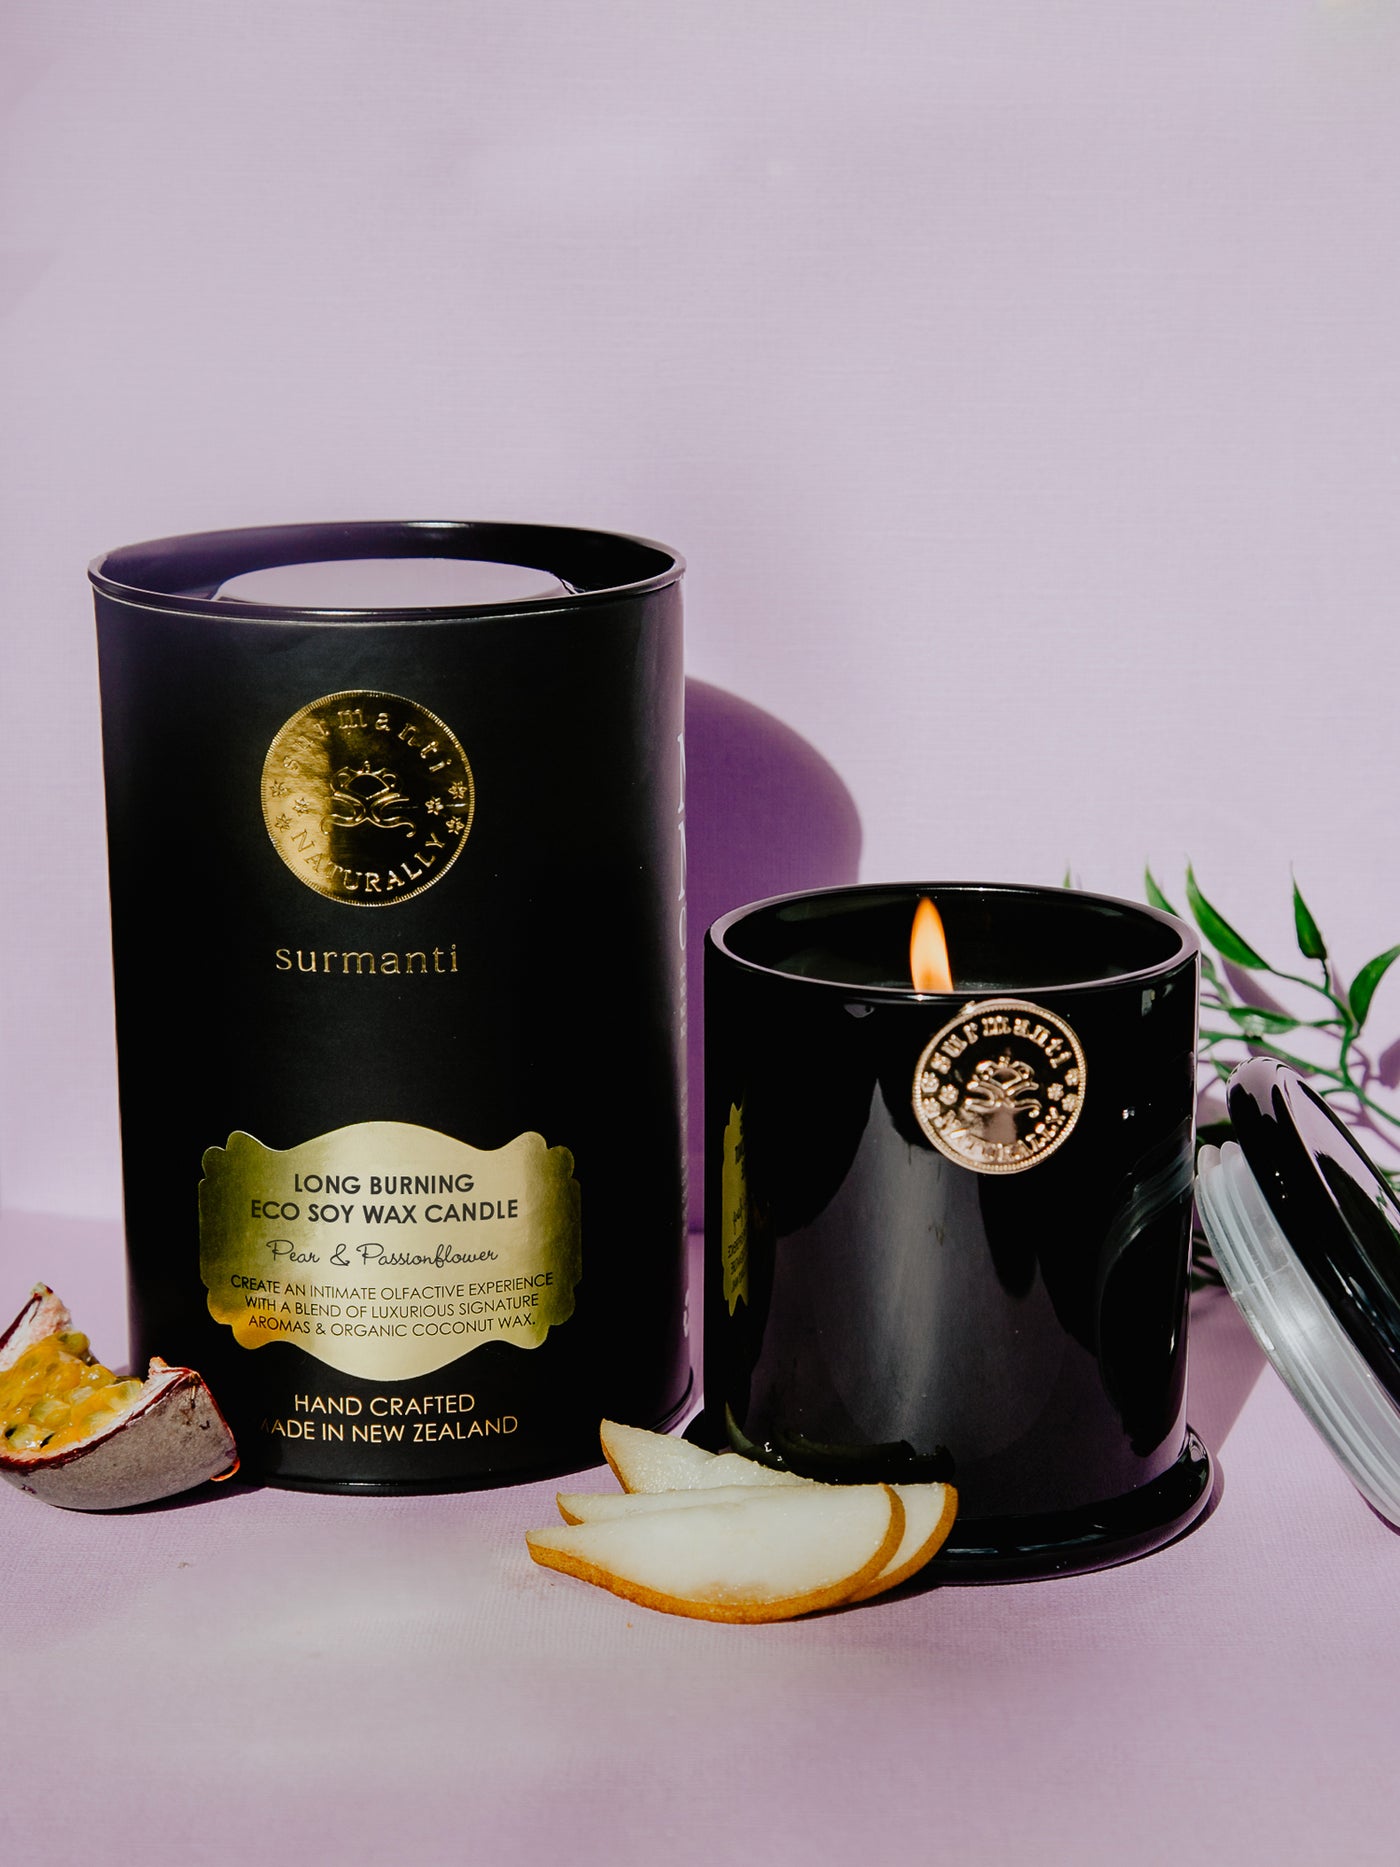 Pear & Passionflower Long Burning Eco Soy Wax Candle - Surmanti - Made In New Zealand